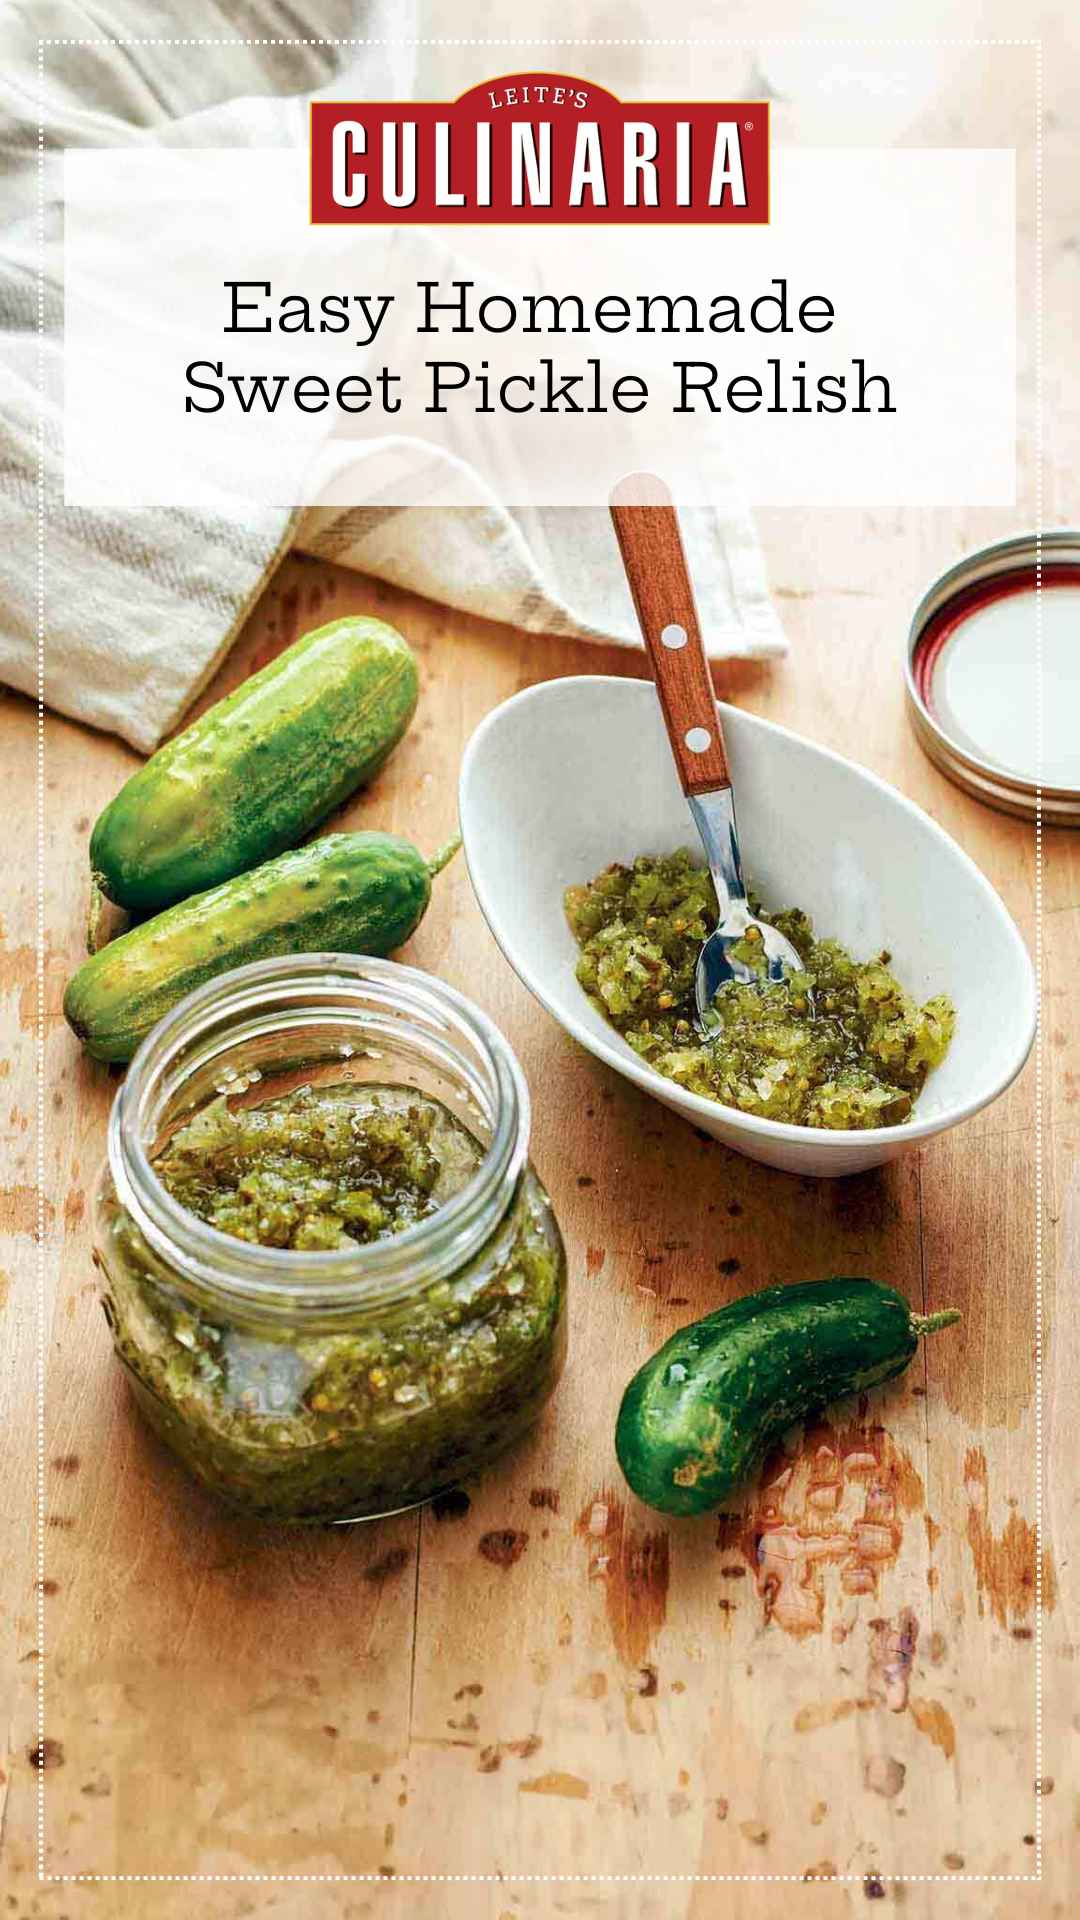 A small jar of sweet pickle relish with some more relish in a bowl nearby and some small pickling cucumbers next to the jar.